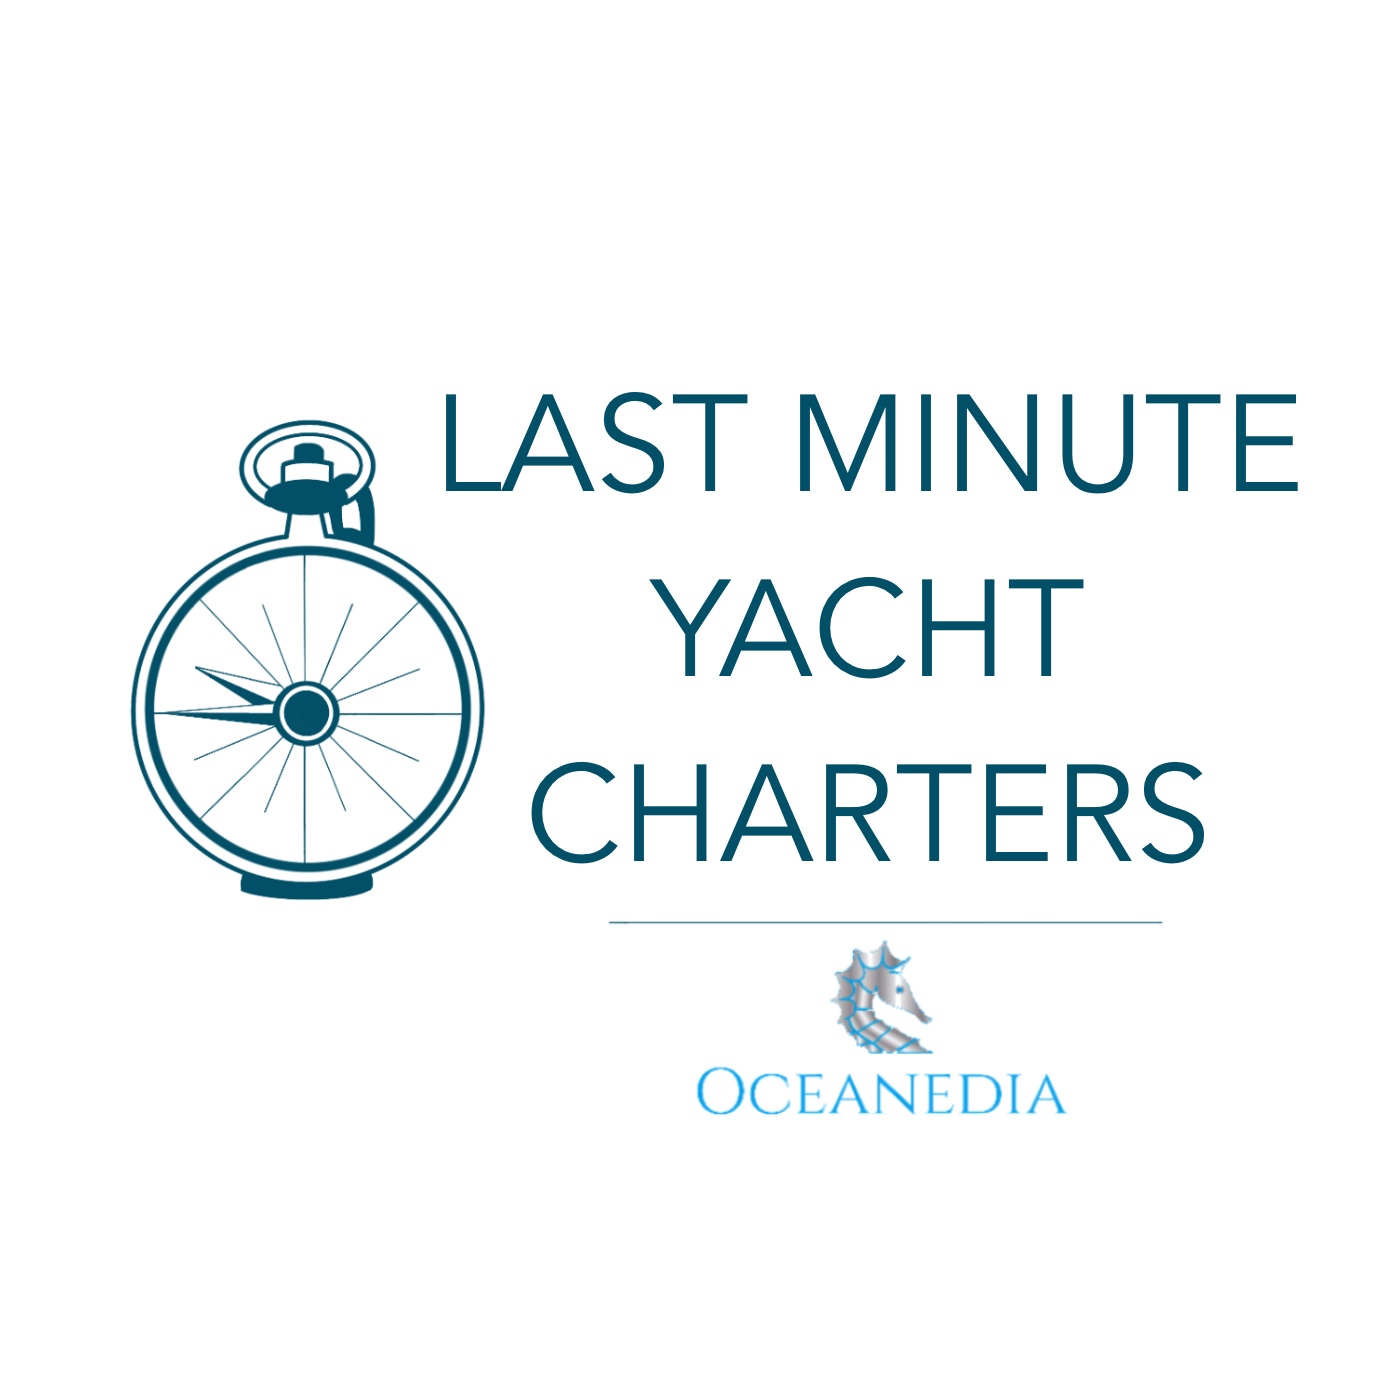 Last Minute Yacht Charters | Bareboat and Crewed Sail Boat Rentals by Oceanedia | Plan and book your sublime sailing escape now.